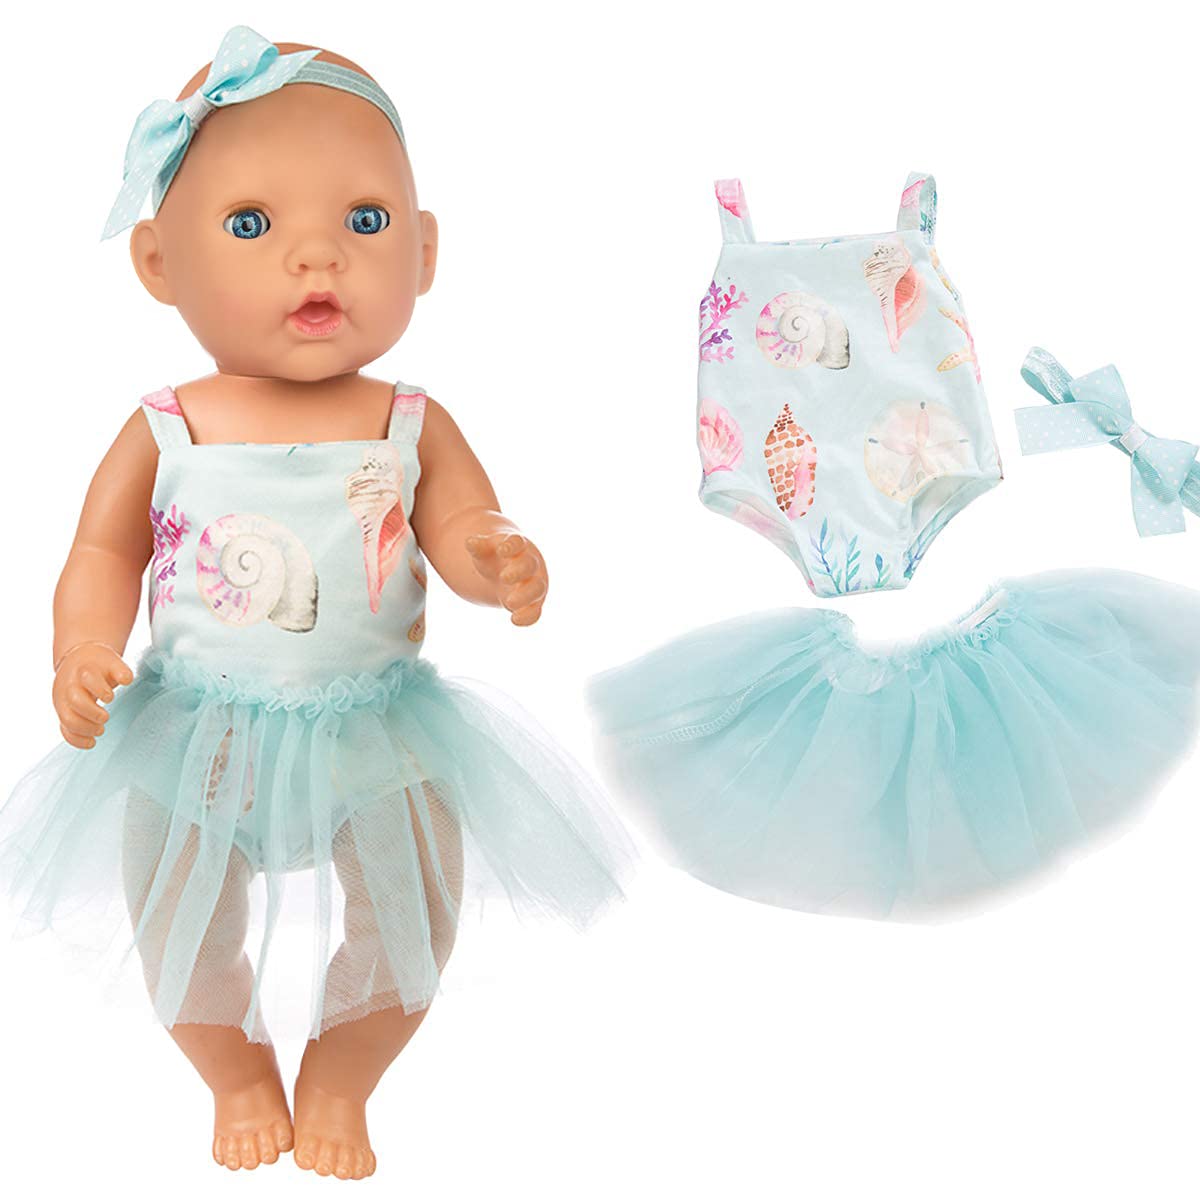 Ecore Fun 10 Item 14-16 Inch Baby Doll Clothes Dresses Outfits Pjs for 43cm New Born Baby Dolls, 15 Inch Baby Doll, American 18 Inch Girl Doll